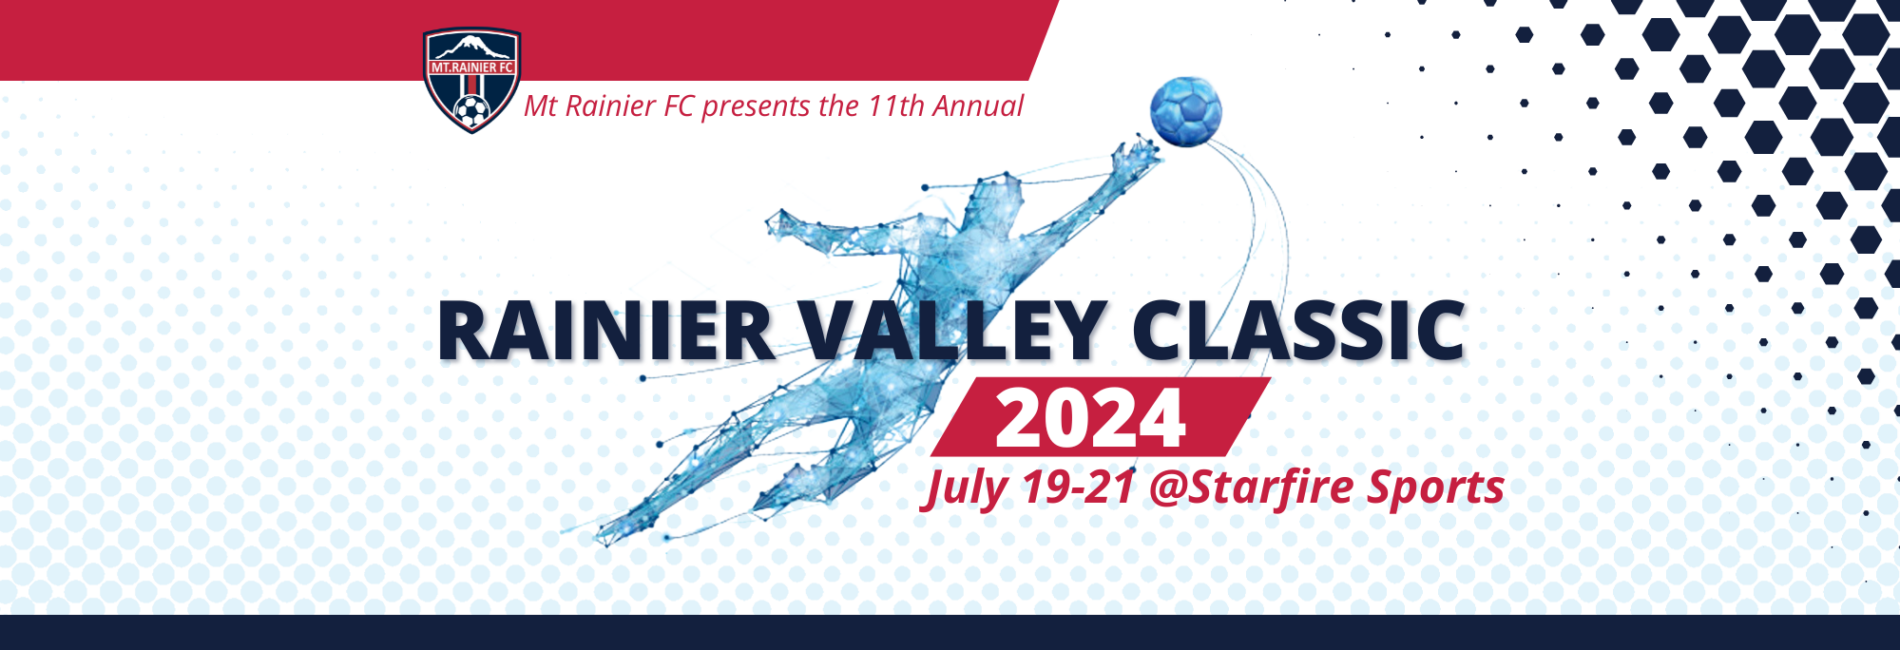 Rainier Valley Classic Tournament hosted by Mt Rainier FC. July 19-21 2024 at Starfire Sports Complex.